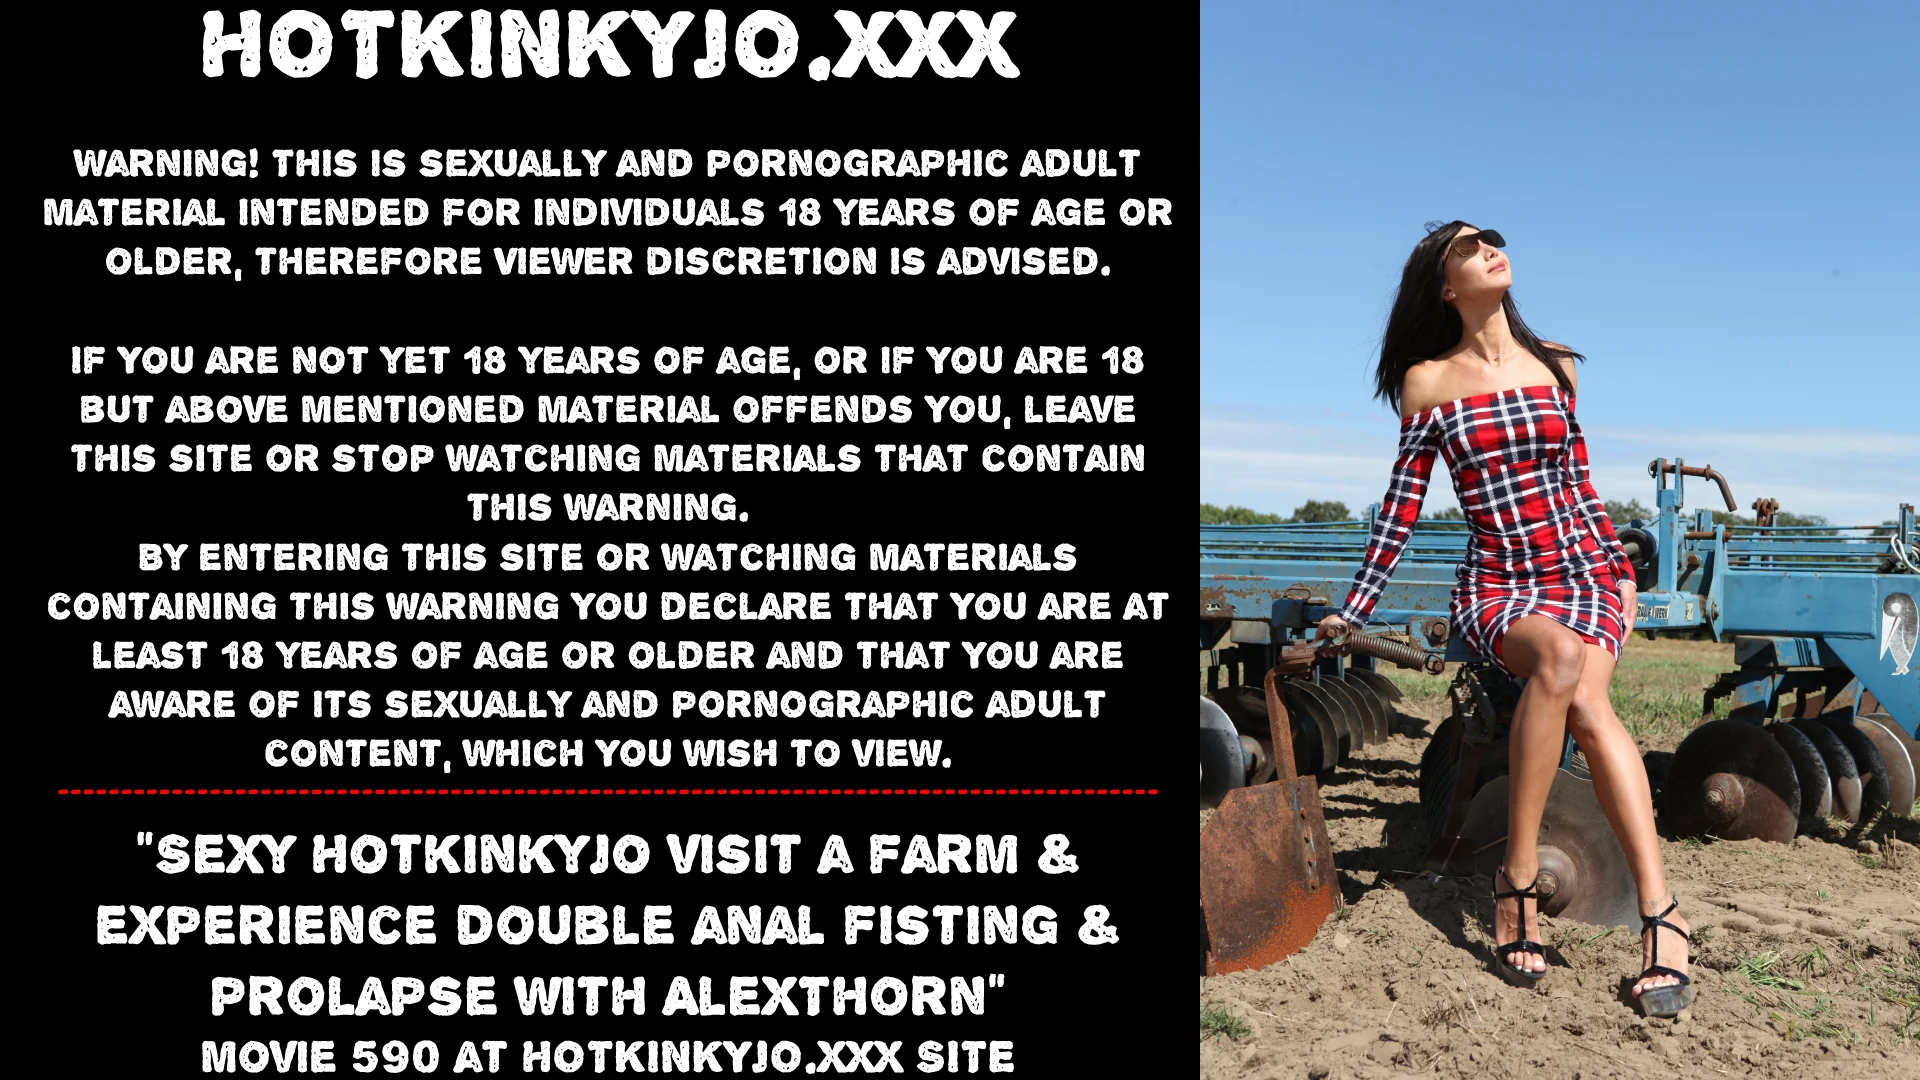 Hotkinkyjo visit farm and experience double anal fisting